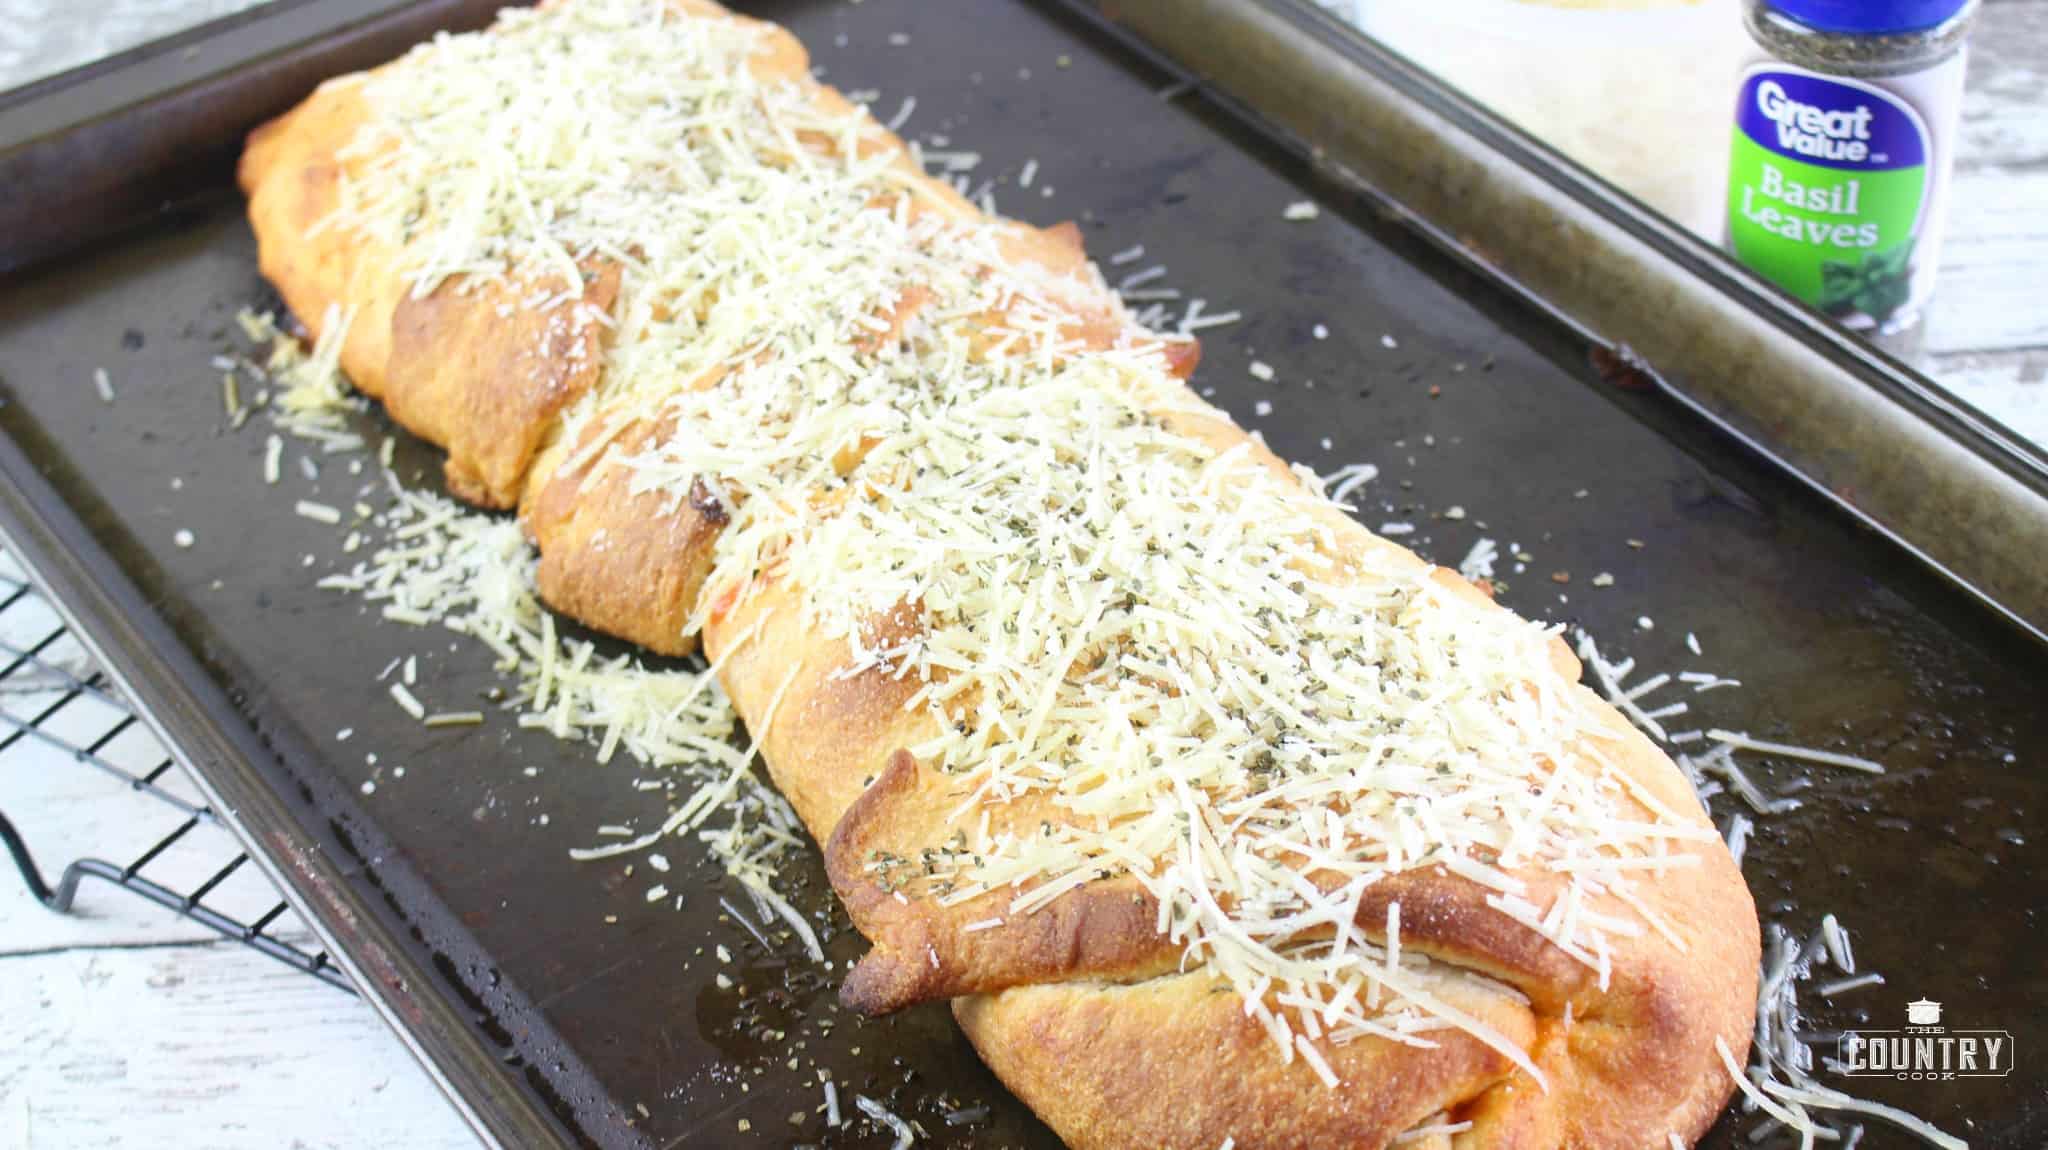 baked Stromboli topped with shredded Parmesan cheese.